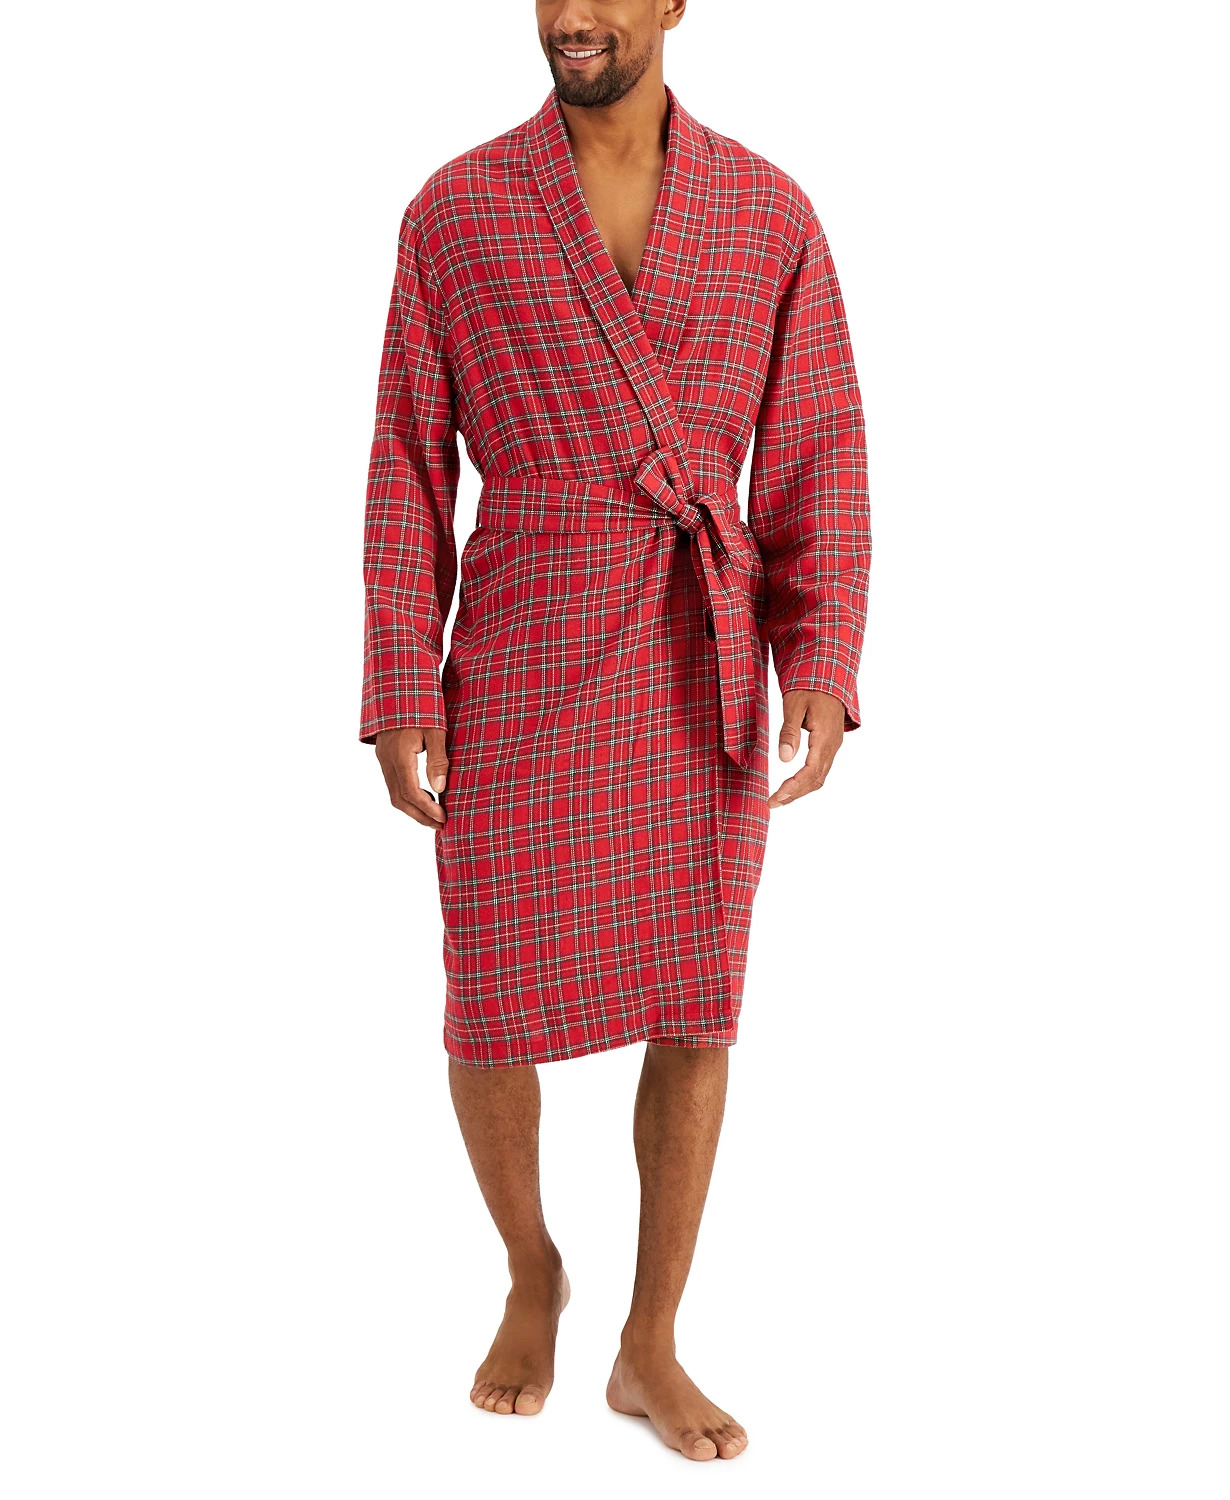 Club Room Men's Plaid Shawl Collar Flannel Robe (red) $11.20 & More + Free Store Pickup at Macy's or FS on $25+